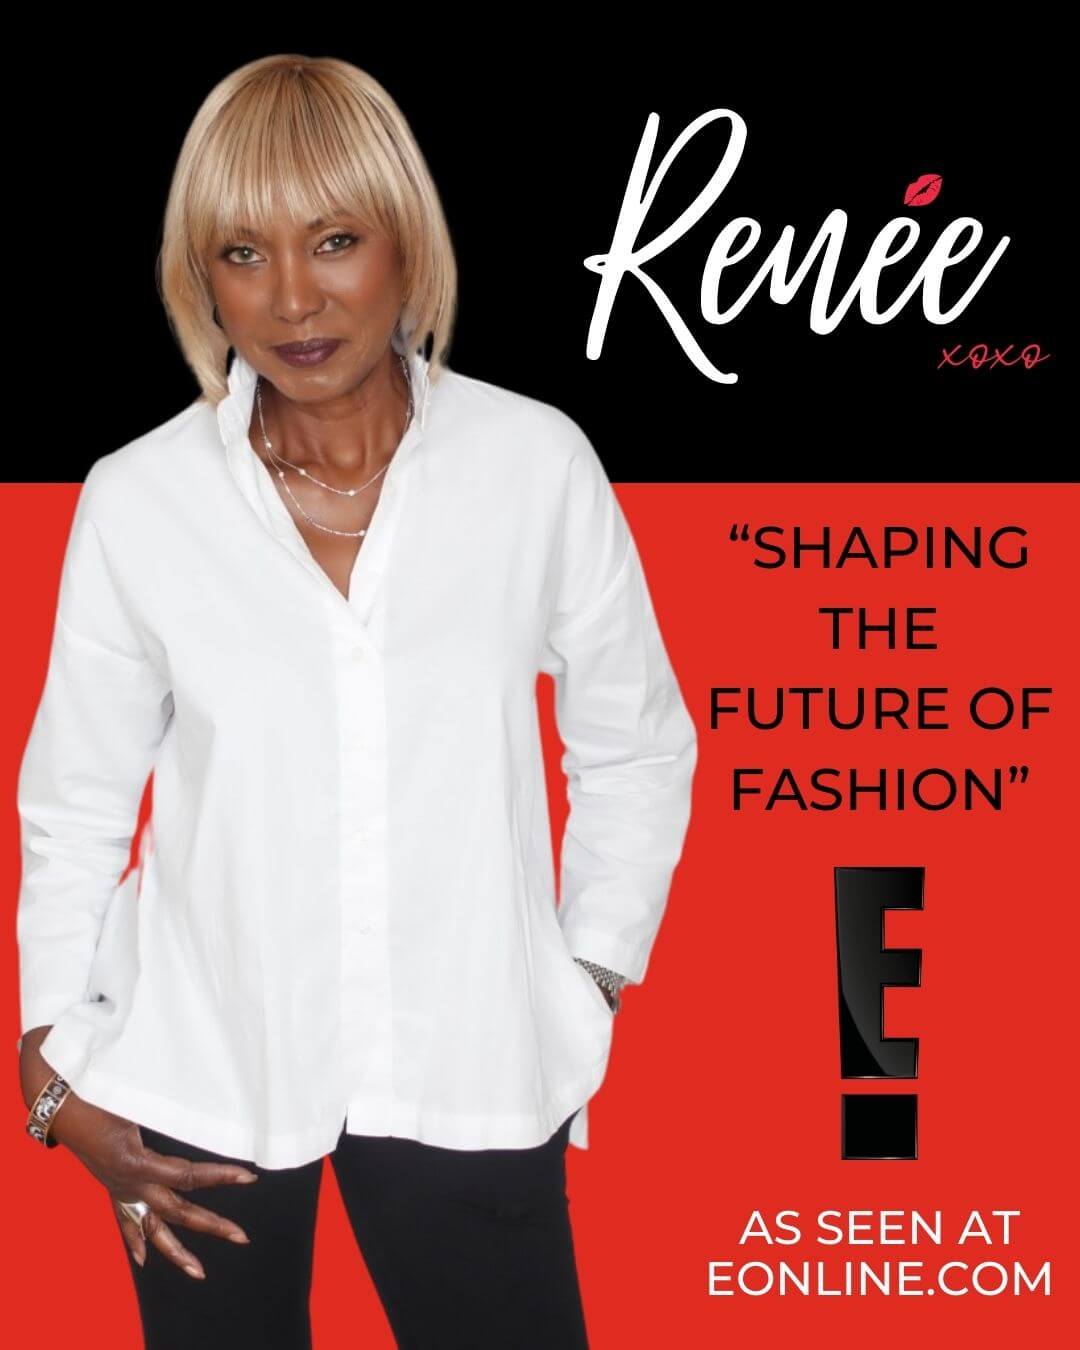 E! features Renée Greenstein as a designer “Shaping the Future of Fashion”